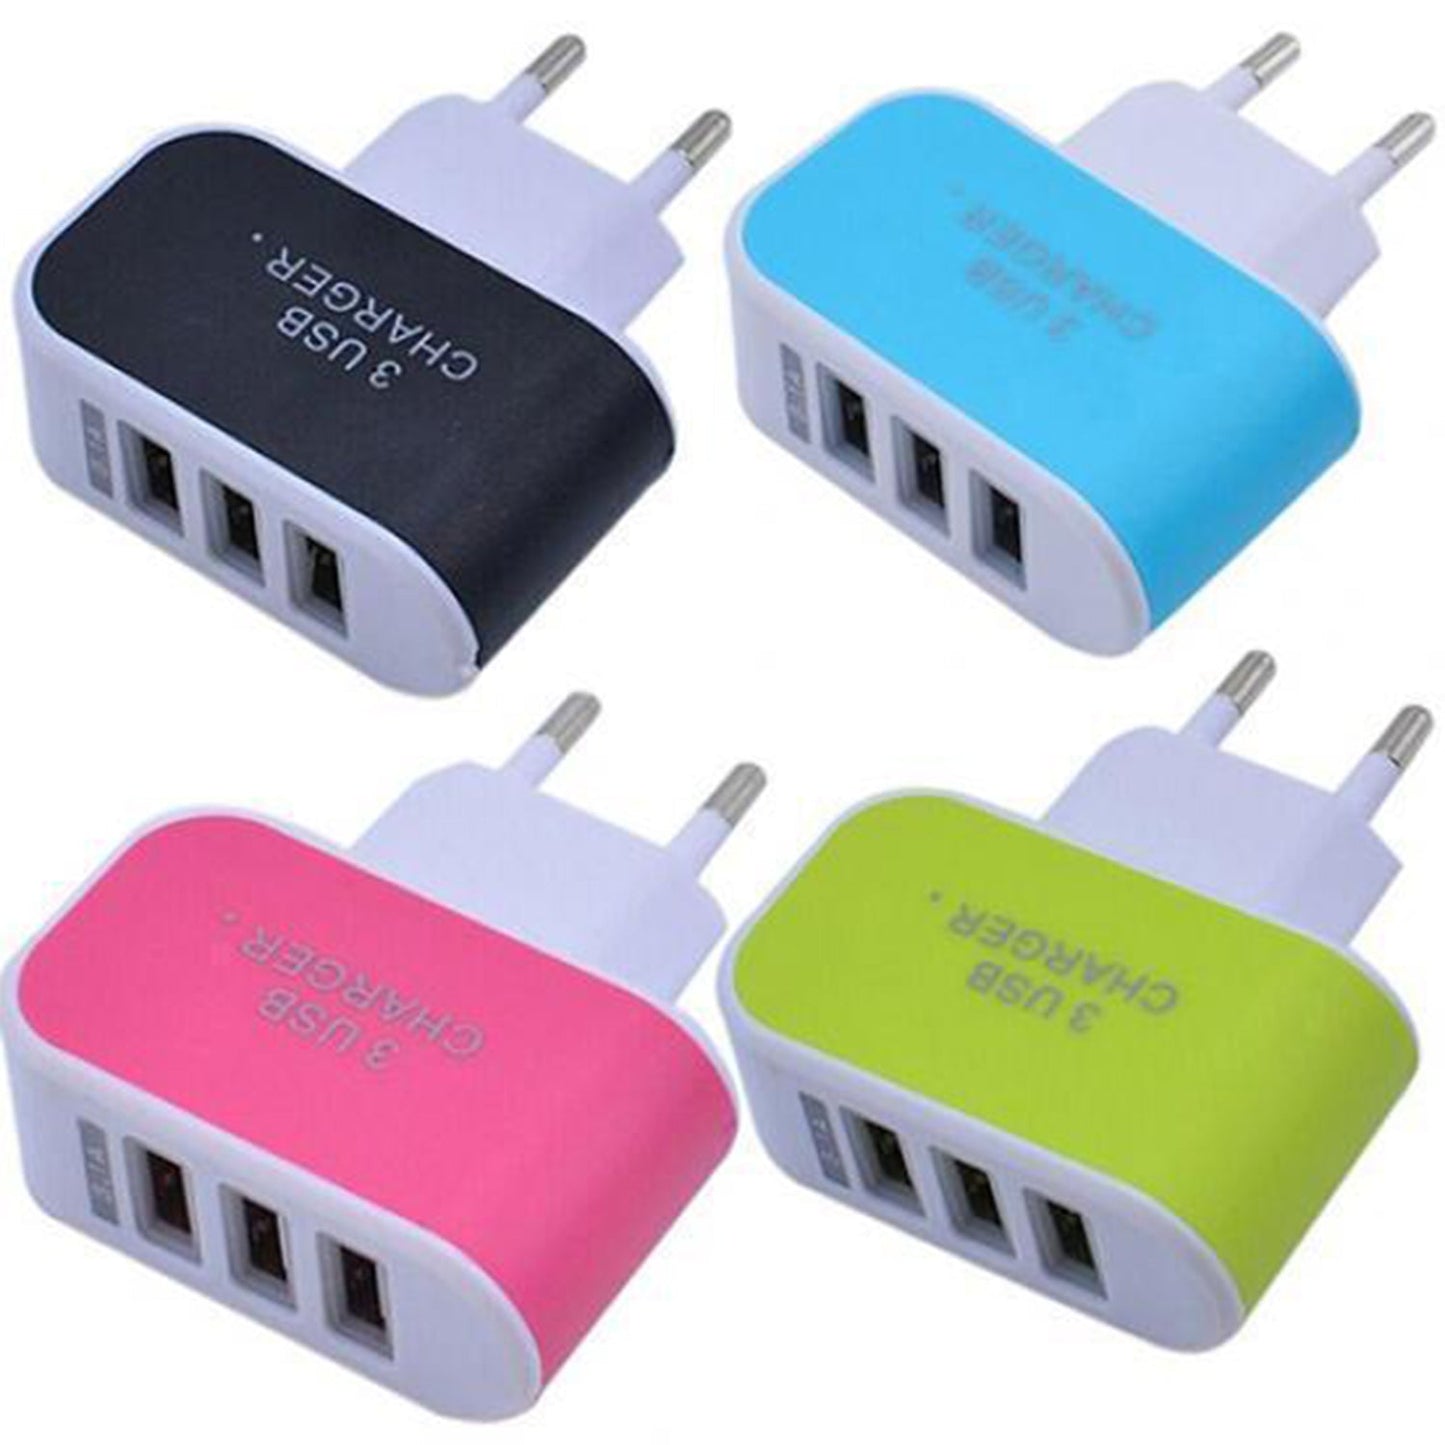 1705 Triple USB 3 Port Wall AC Adapter Charger for Mobile Phone (1Pc Only) Dukandaily